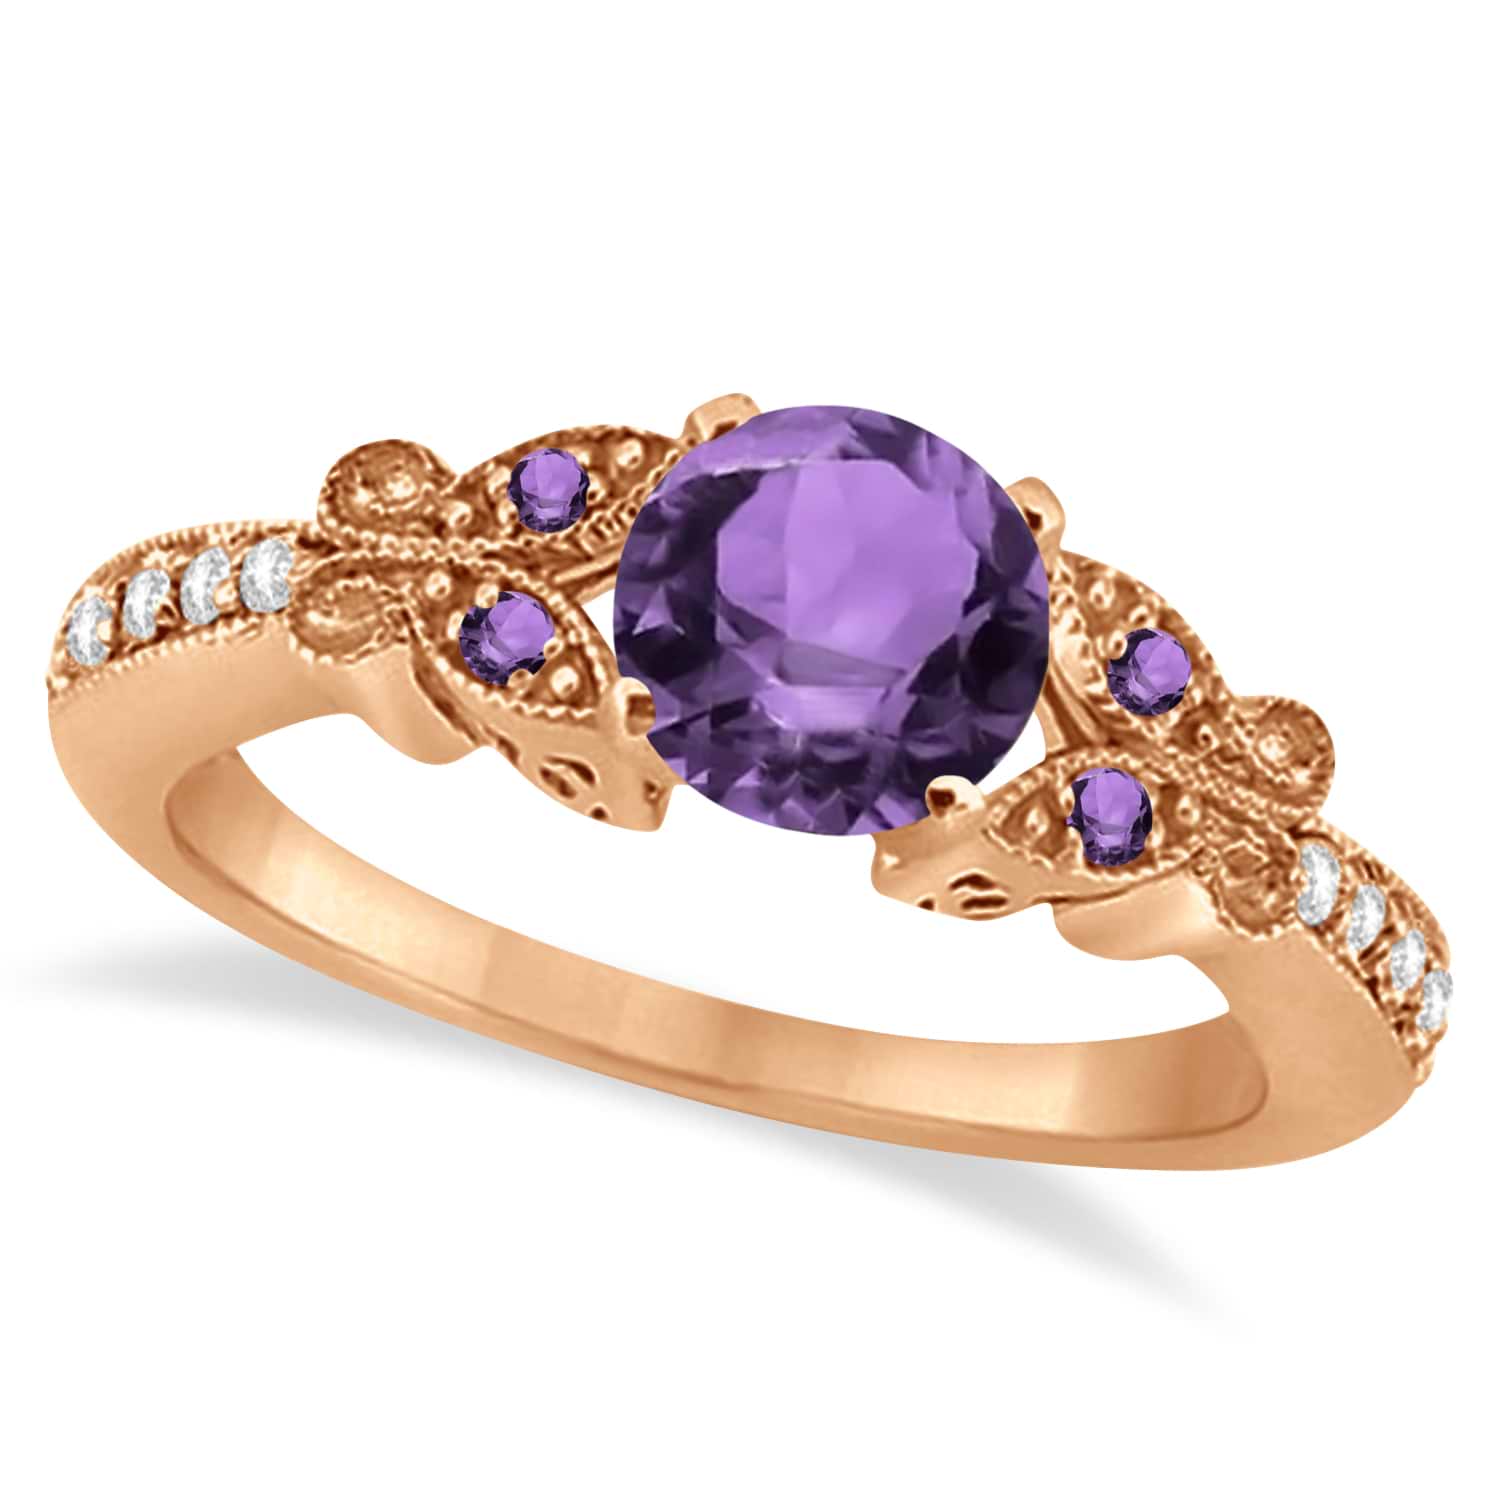 Butterfly Amethyst & Diamond Engagement Ring 14k Rose Gold (1.53ct)